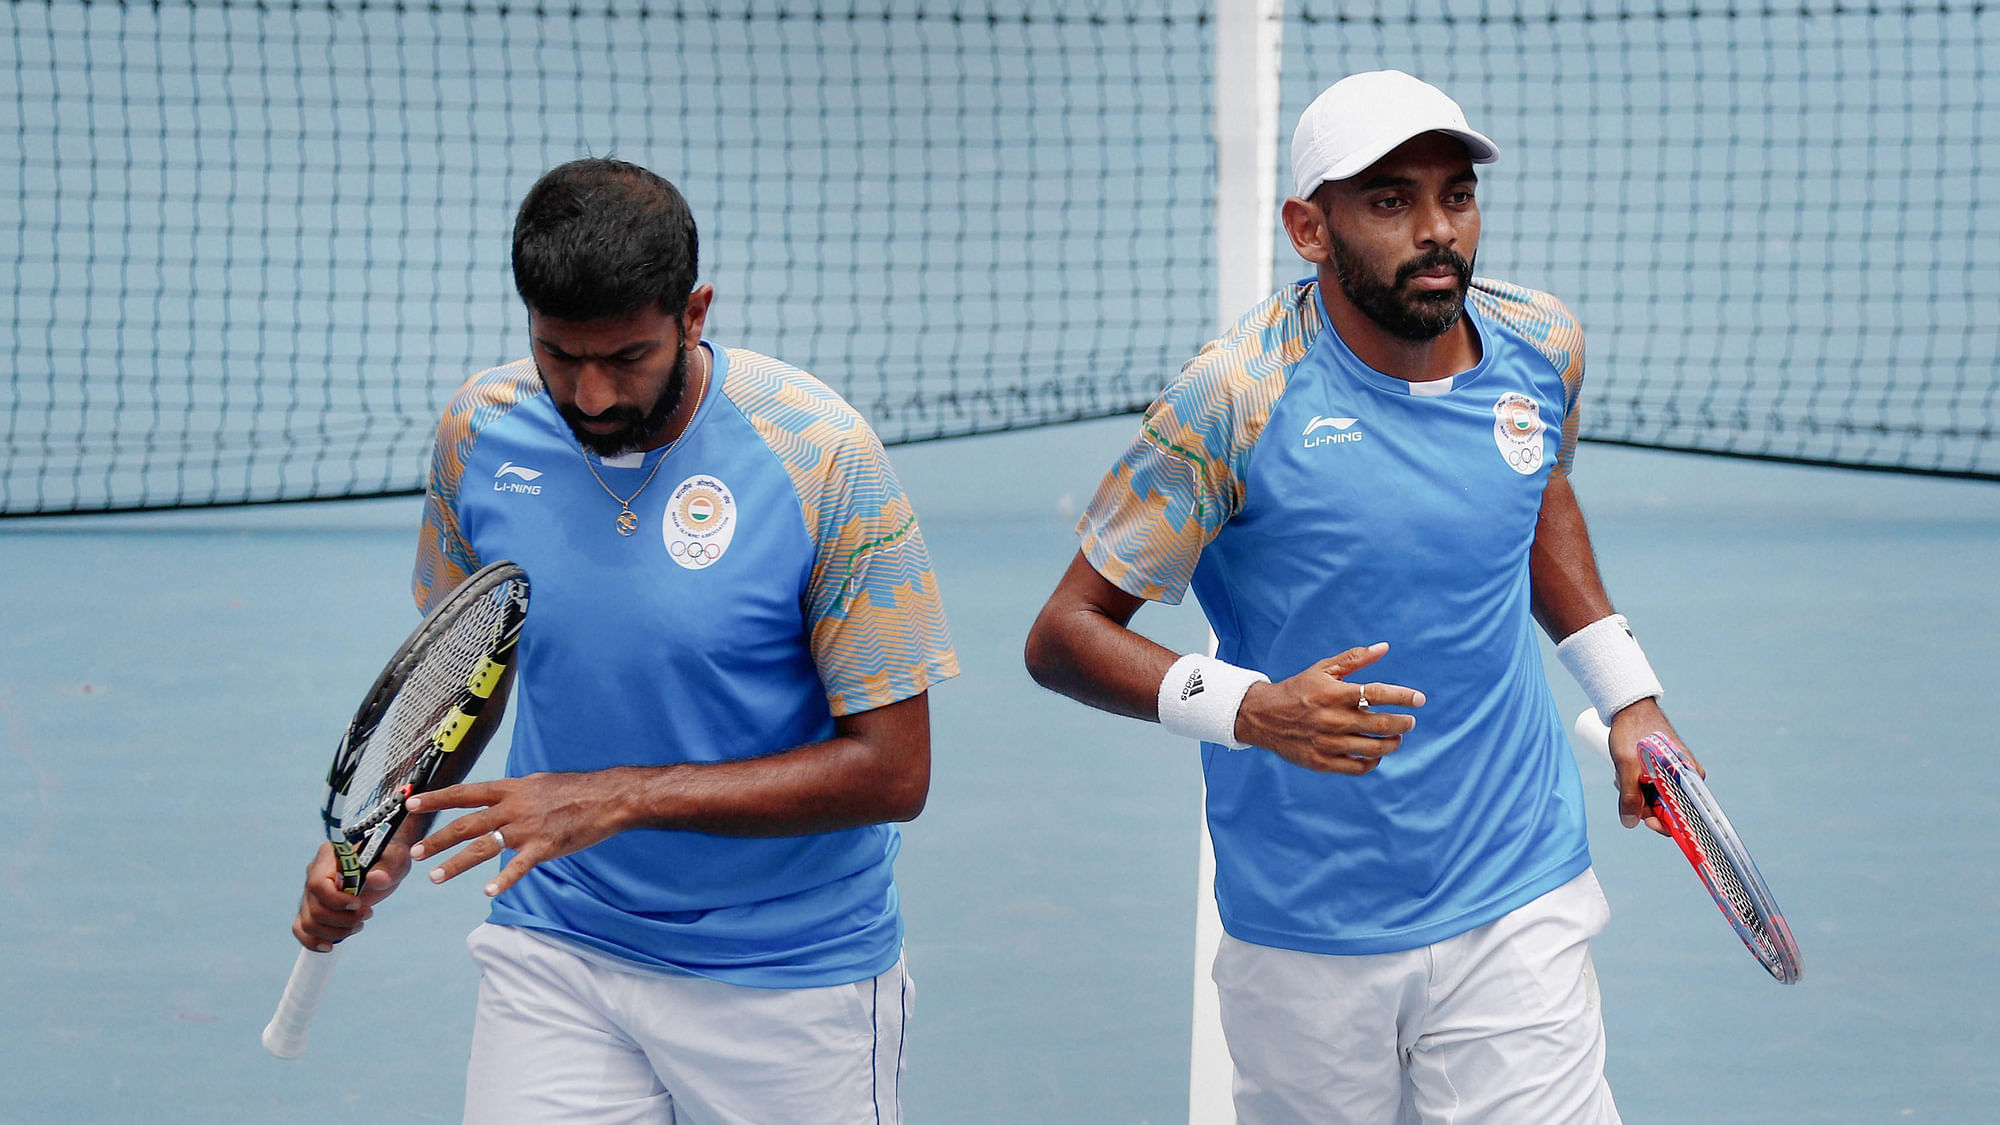 Indian team of Rohan Bopanna and Divij Sharan lost to the unseeded Spanish pair of Pablo Carreno Busta and Guillermo Garcia-Lopez.